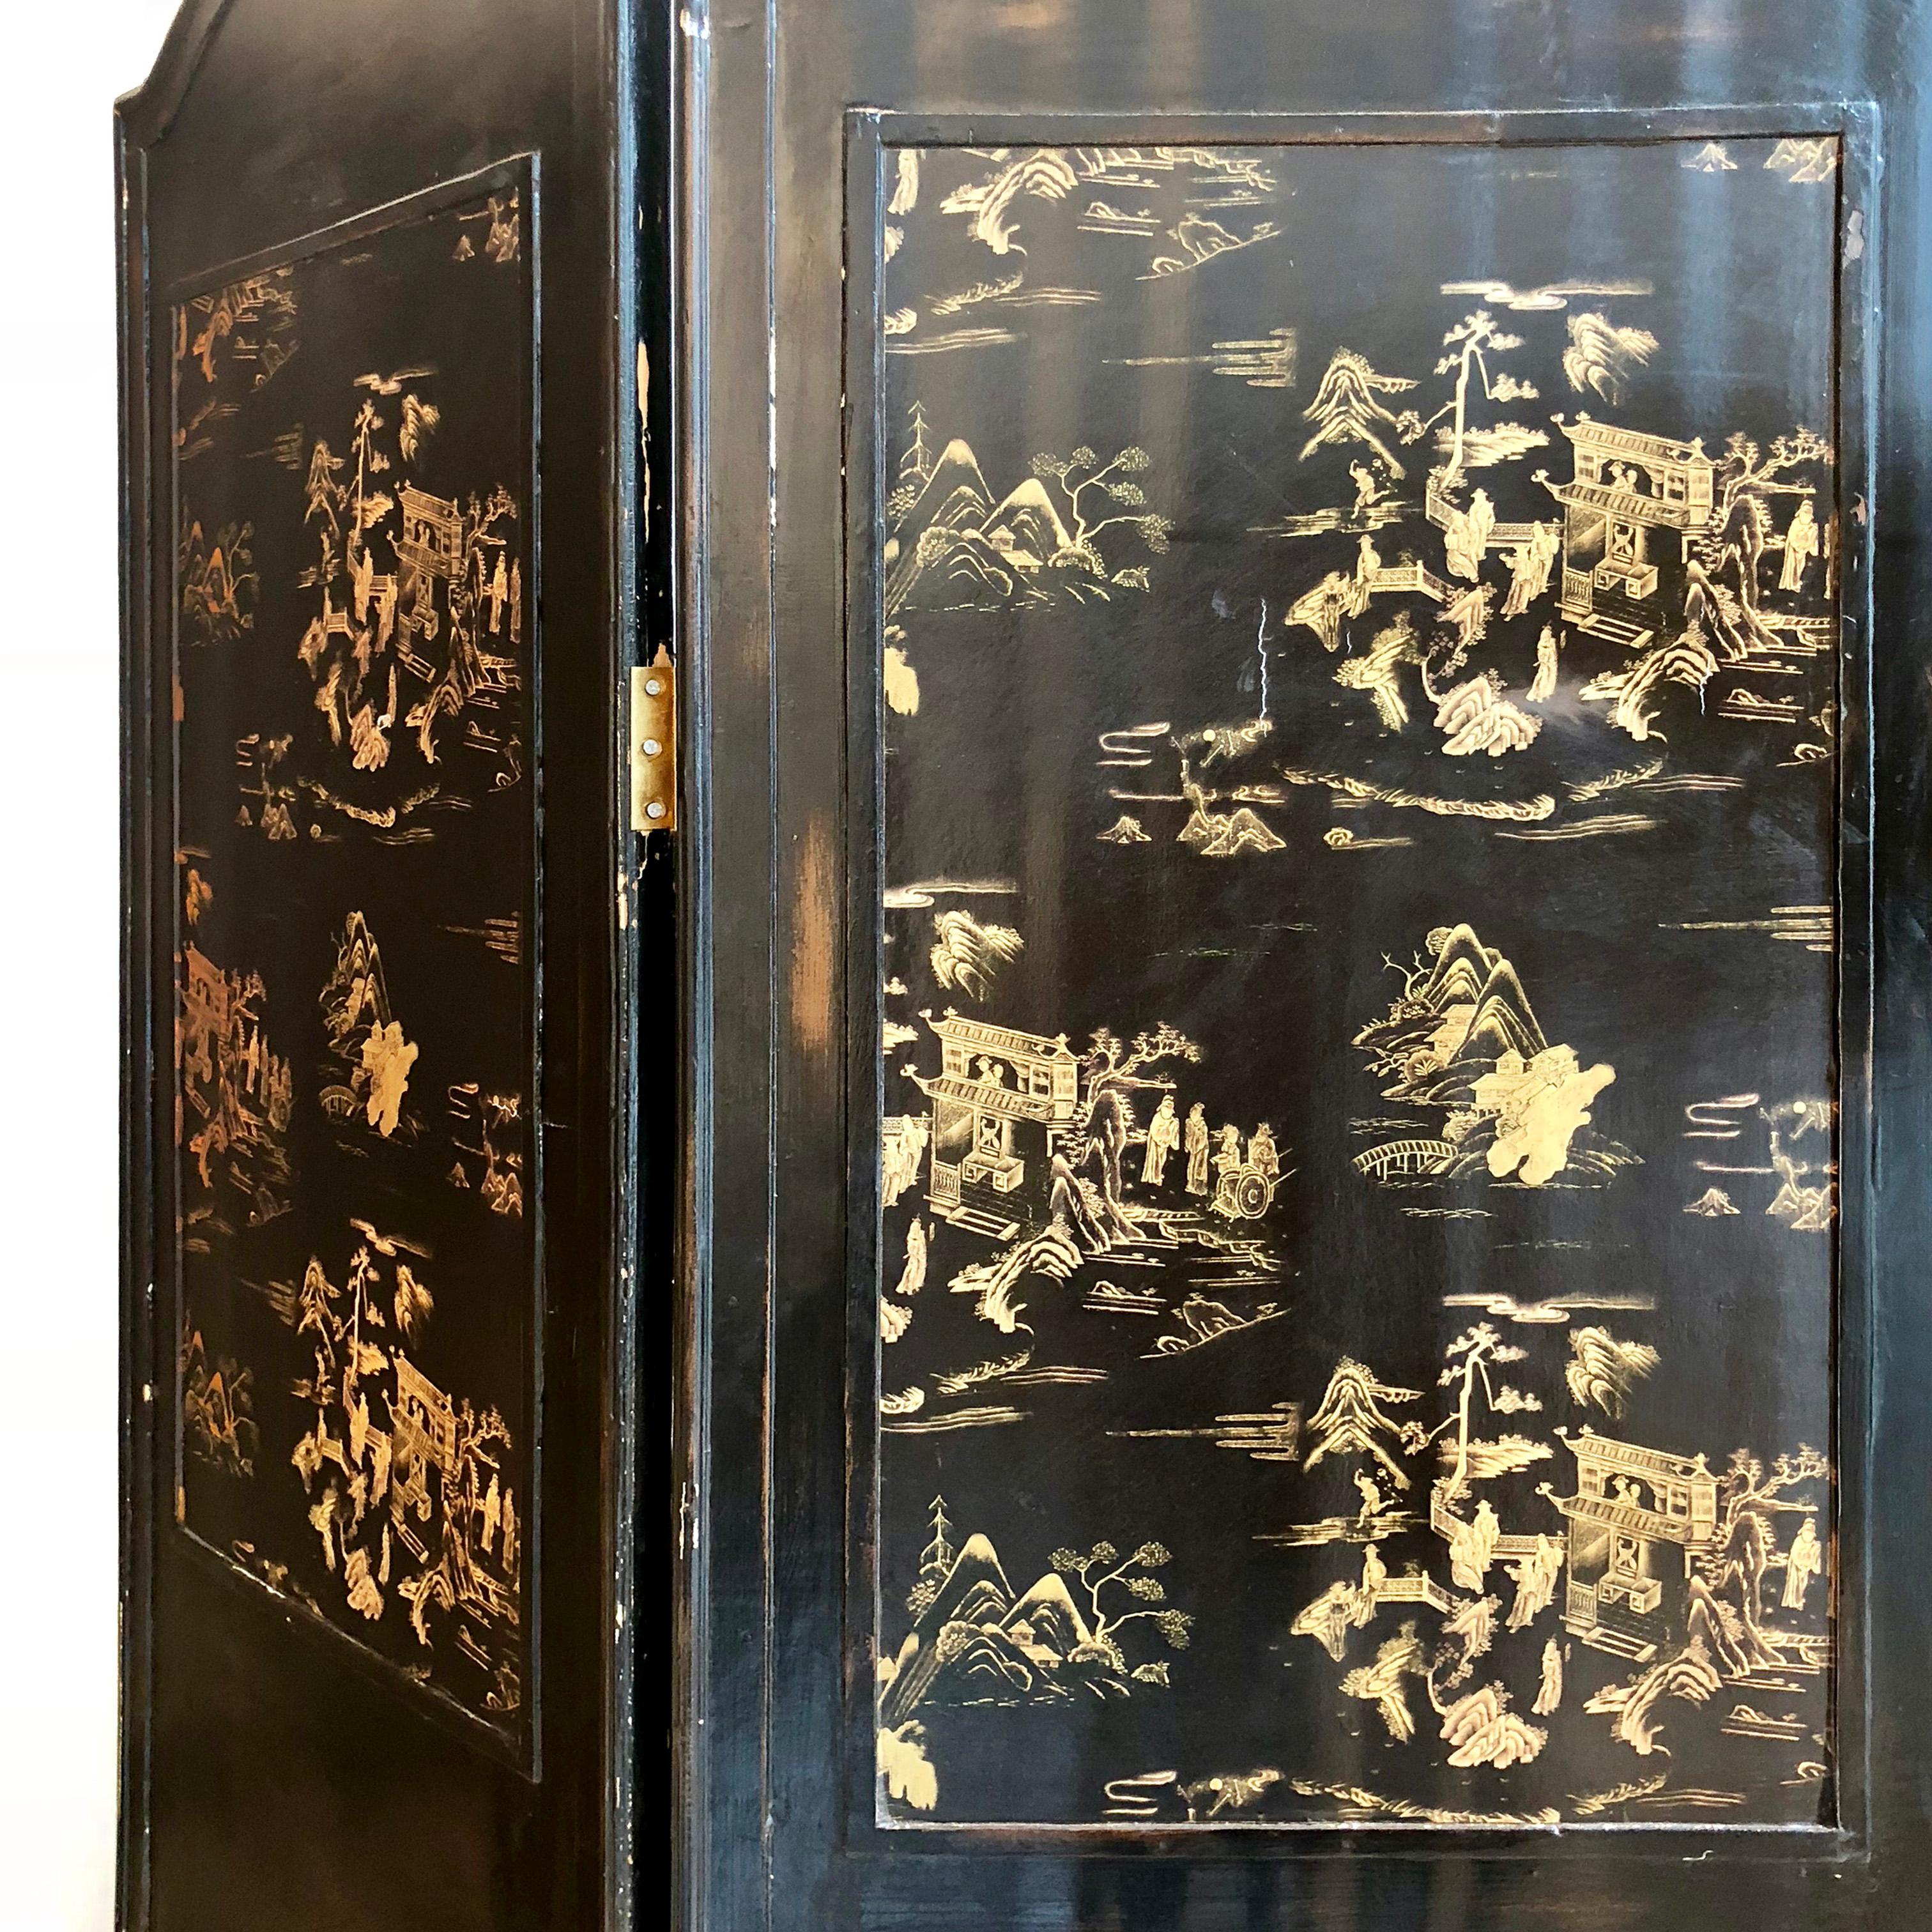 Swedish foldable screen from the mid-1900s with three panels and hand painted wallpaper insets.

Measures: 135 W x 179 H x 2 D cm (Each section measures 45 cm).

Good vintage condition considering the age.